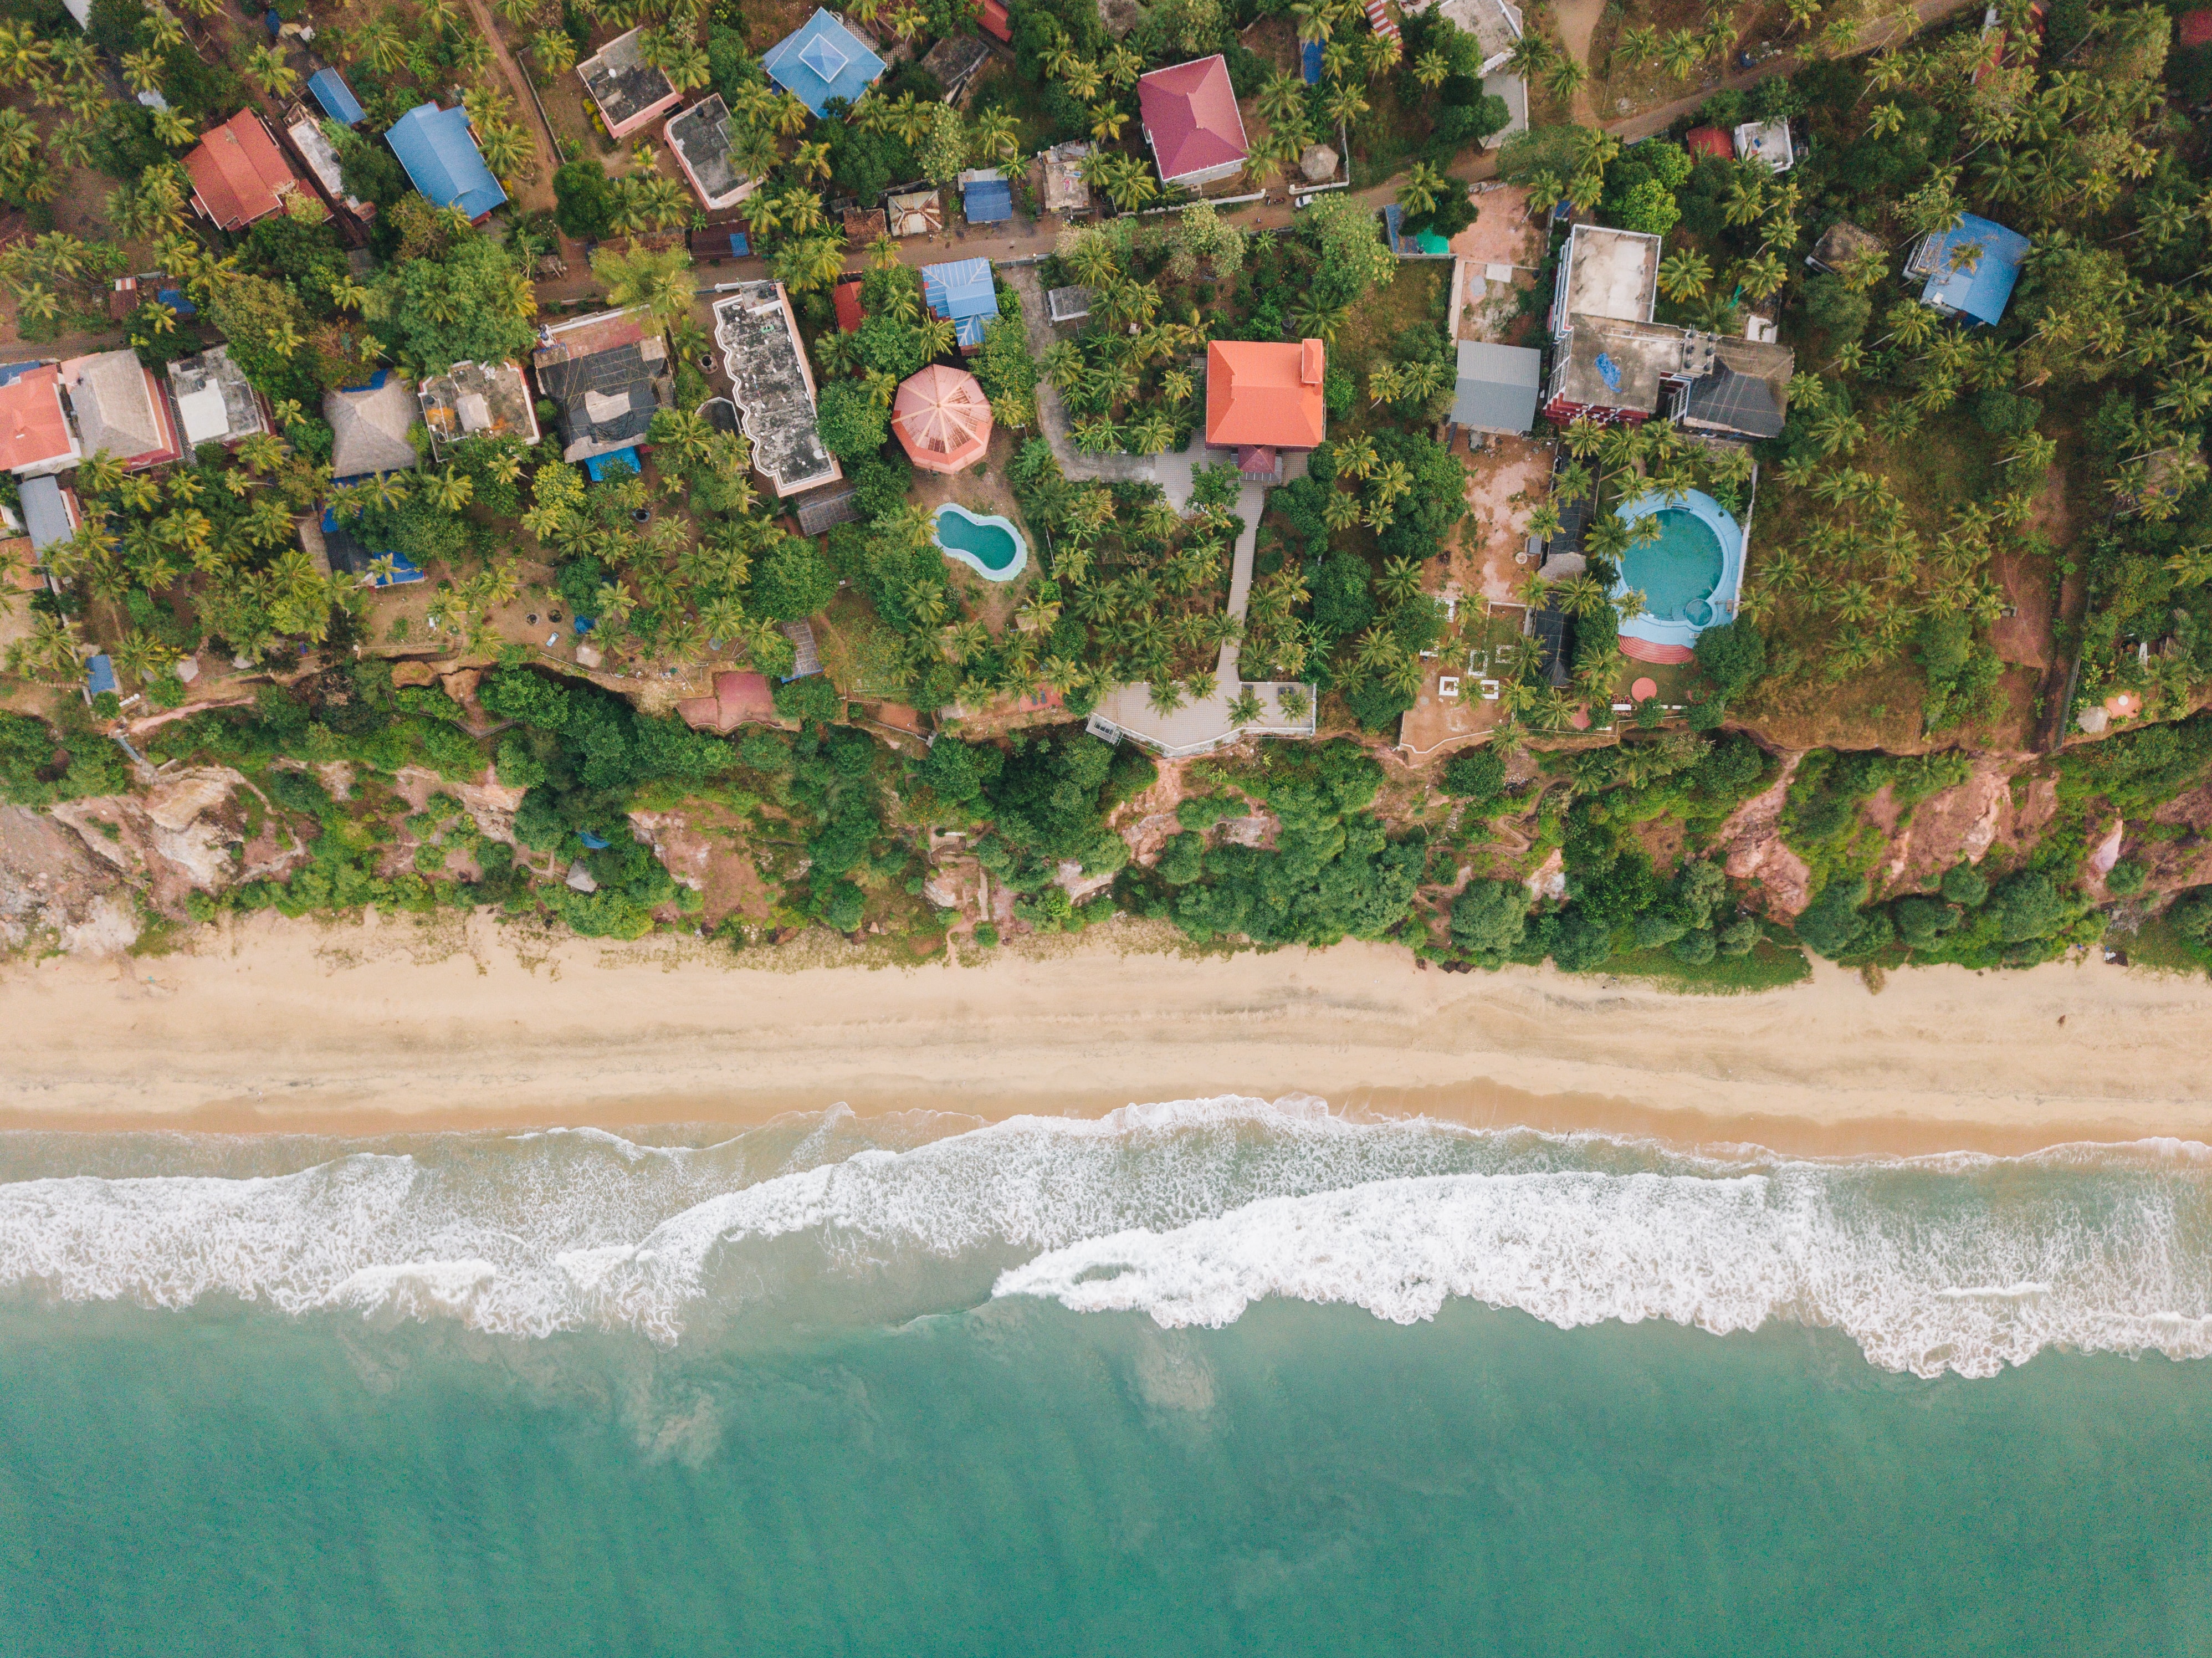 Mobile wallpaper shore, view from above, nature, beach, palms, building, bank